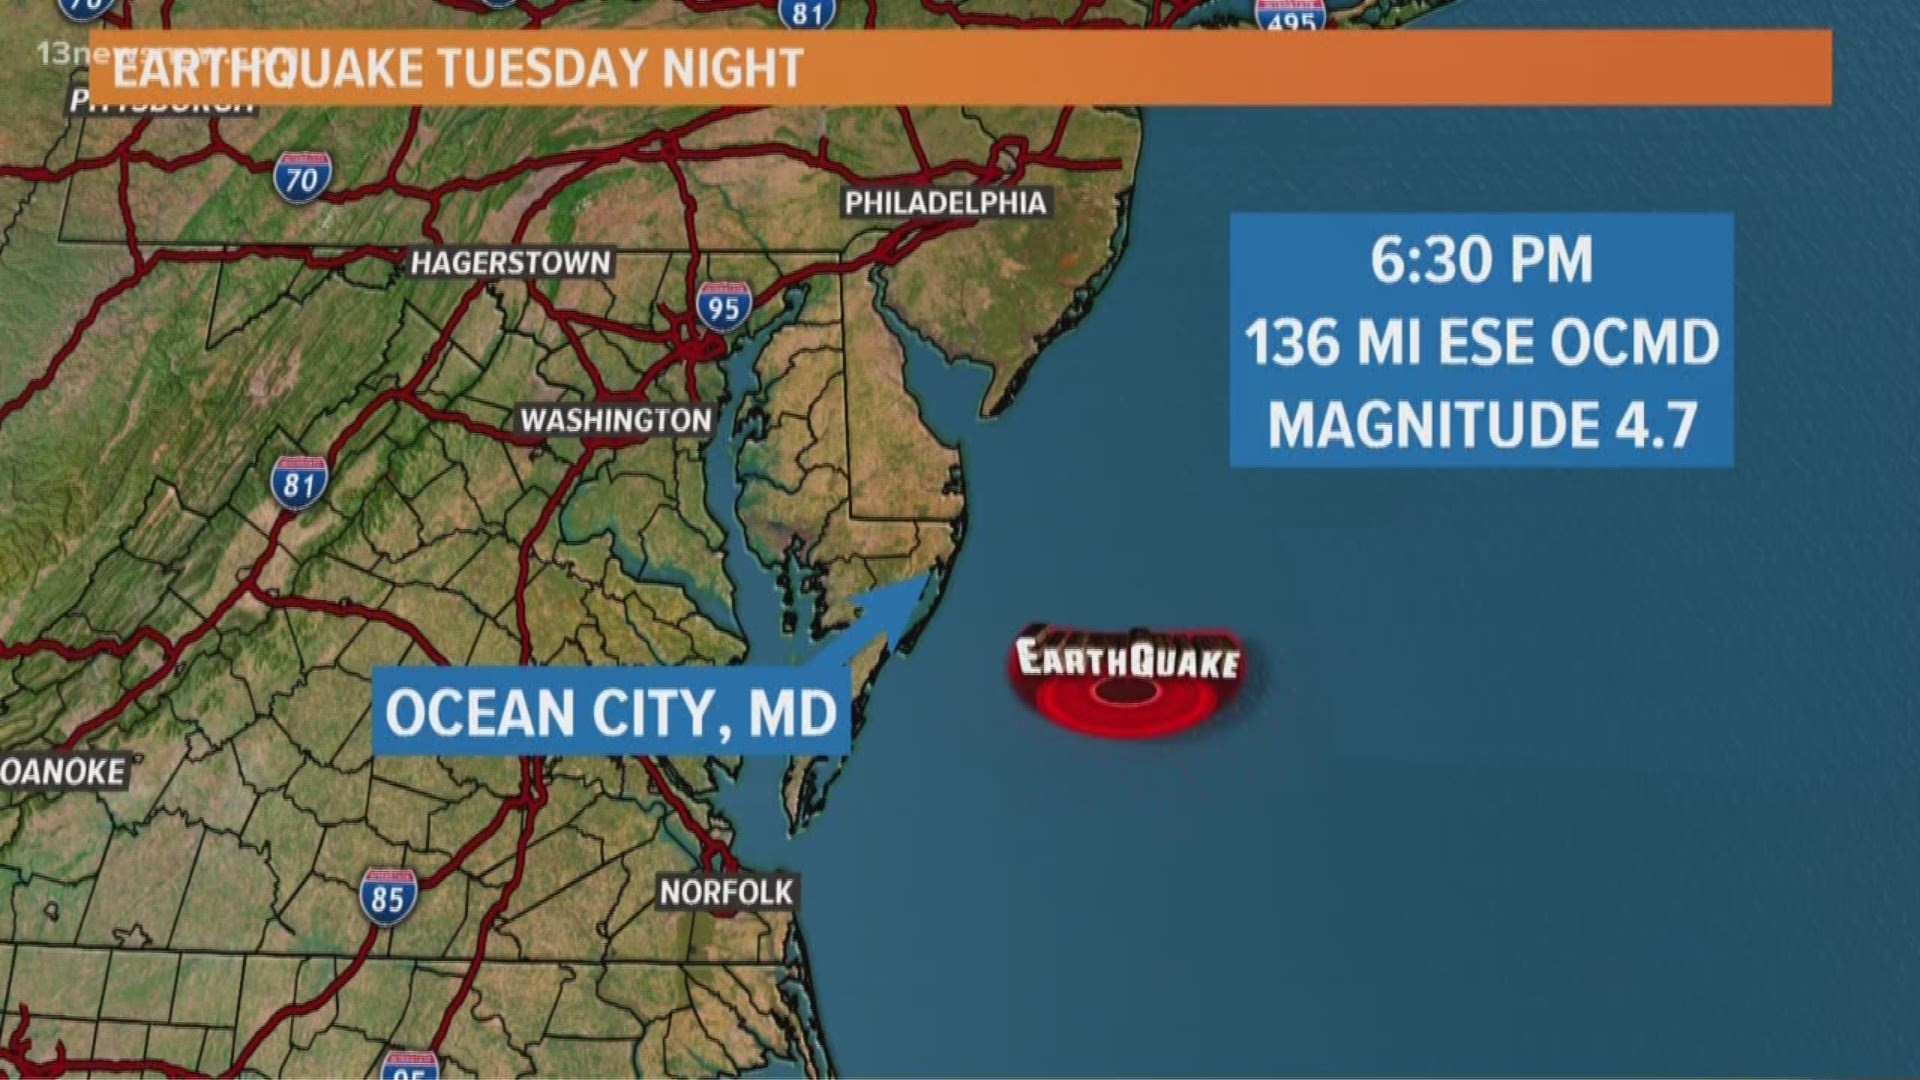 The earthquake was 136 miles off the coast of Ocean City, Maryland, according to the organization.